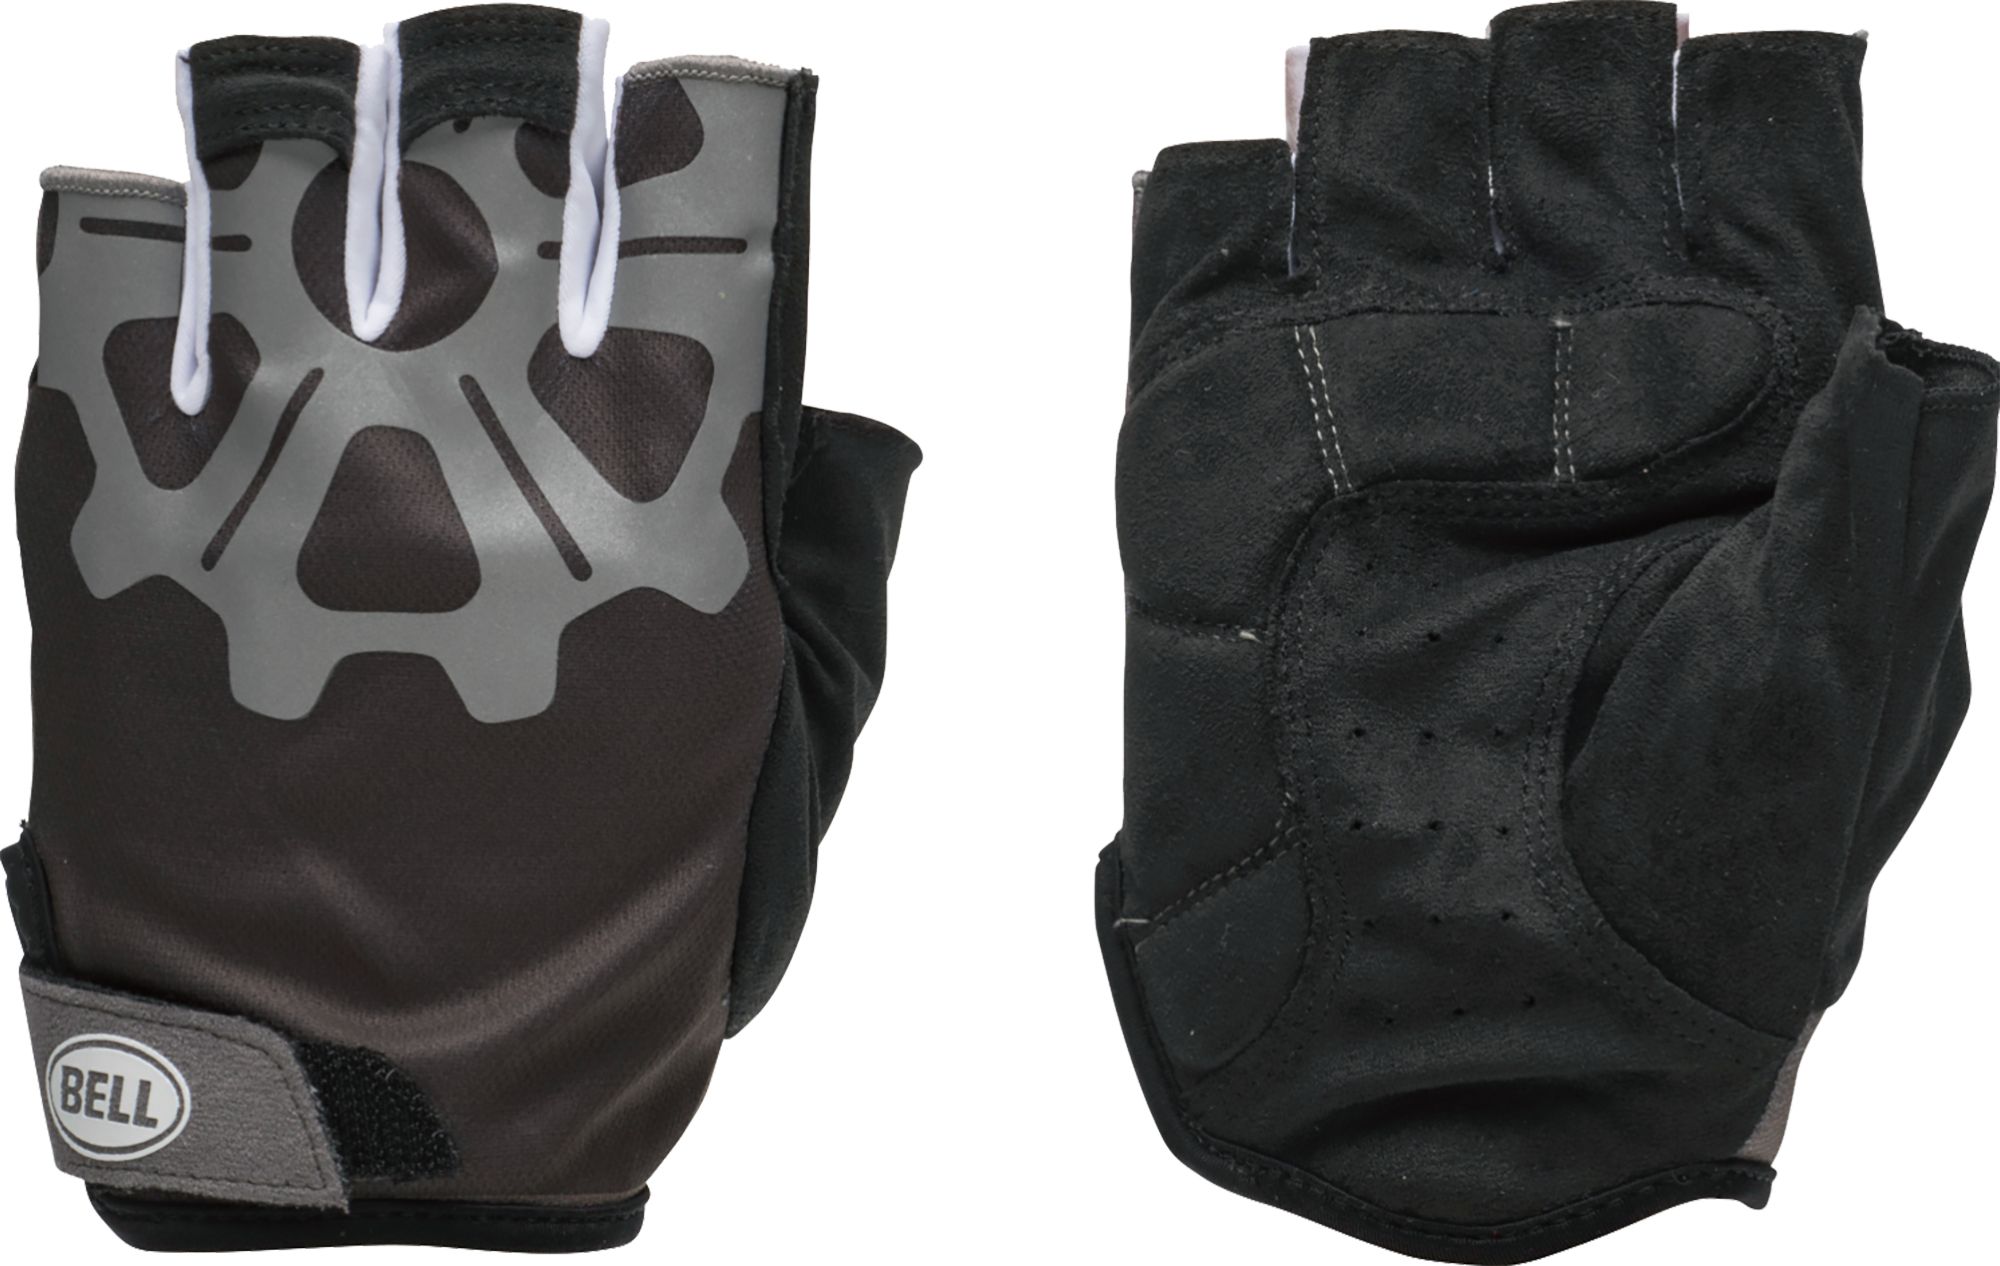 Bell Ramble 600 Reflective Gloves 